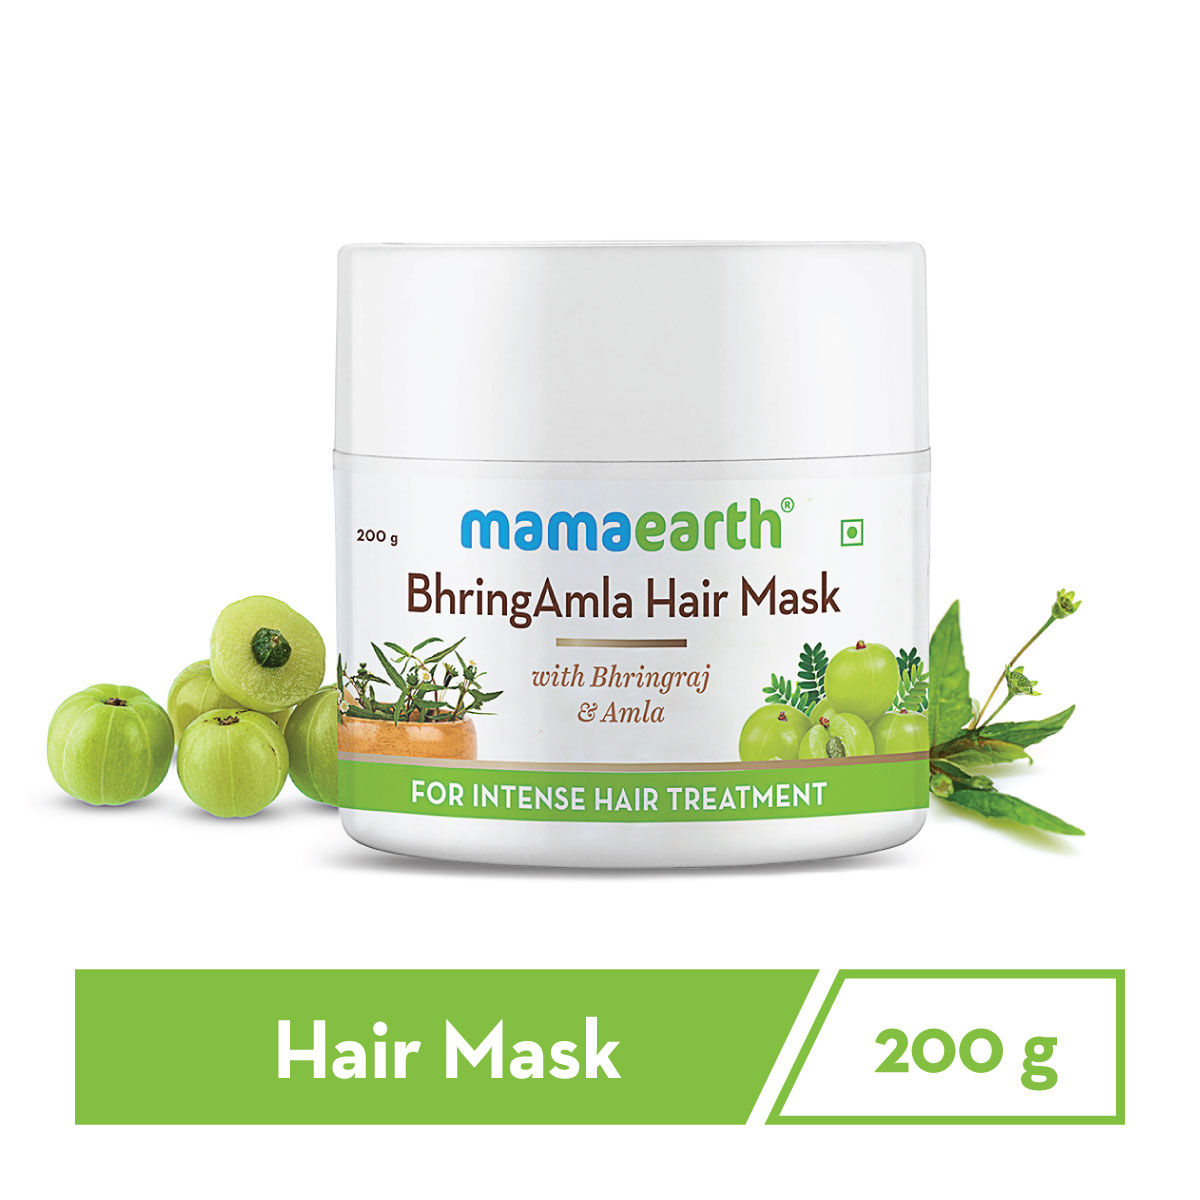 Mamaearth BhringAmla Hair Mask with Bhringraj & Amla for Intense Hair  Treatment: Buy Mamaearth BhringAmla Hair Mask with Bhringraj & Amla for  Intense Hair Treatment Online at Best Price in India |